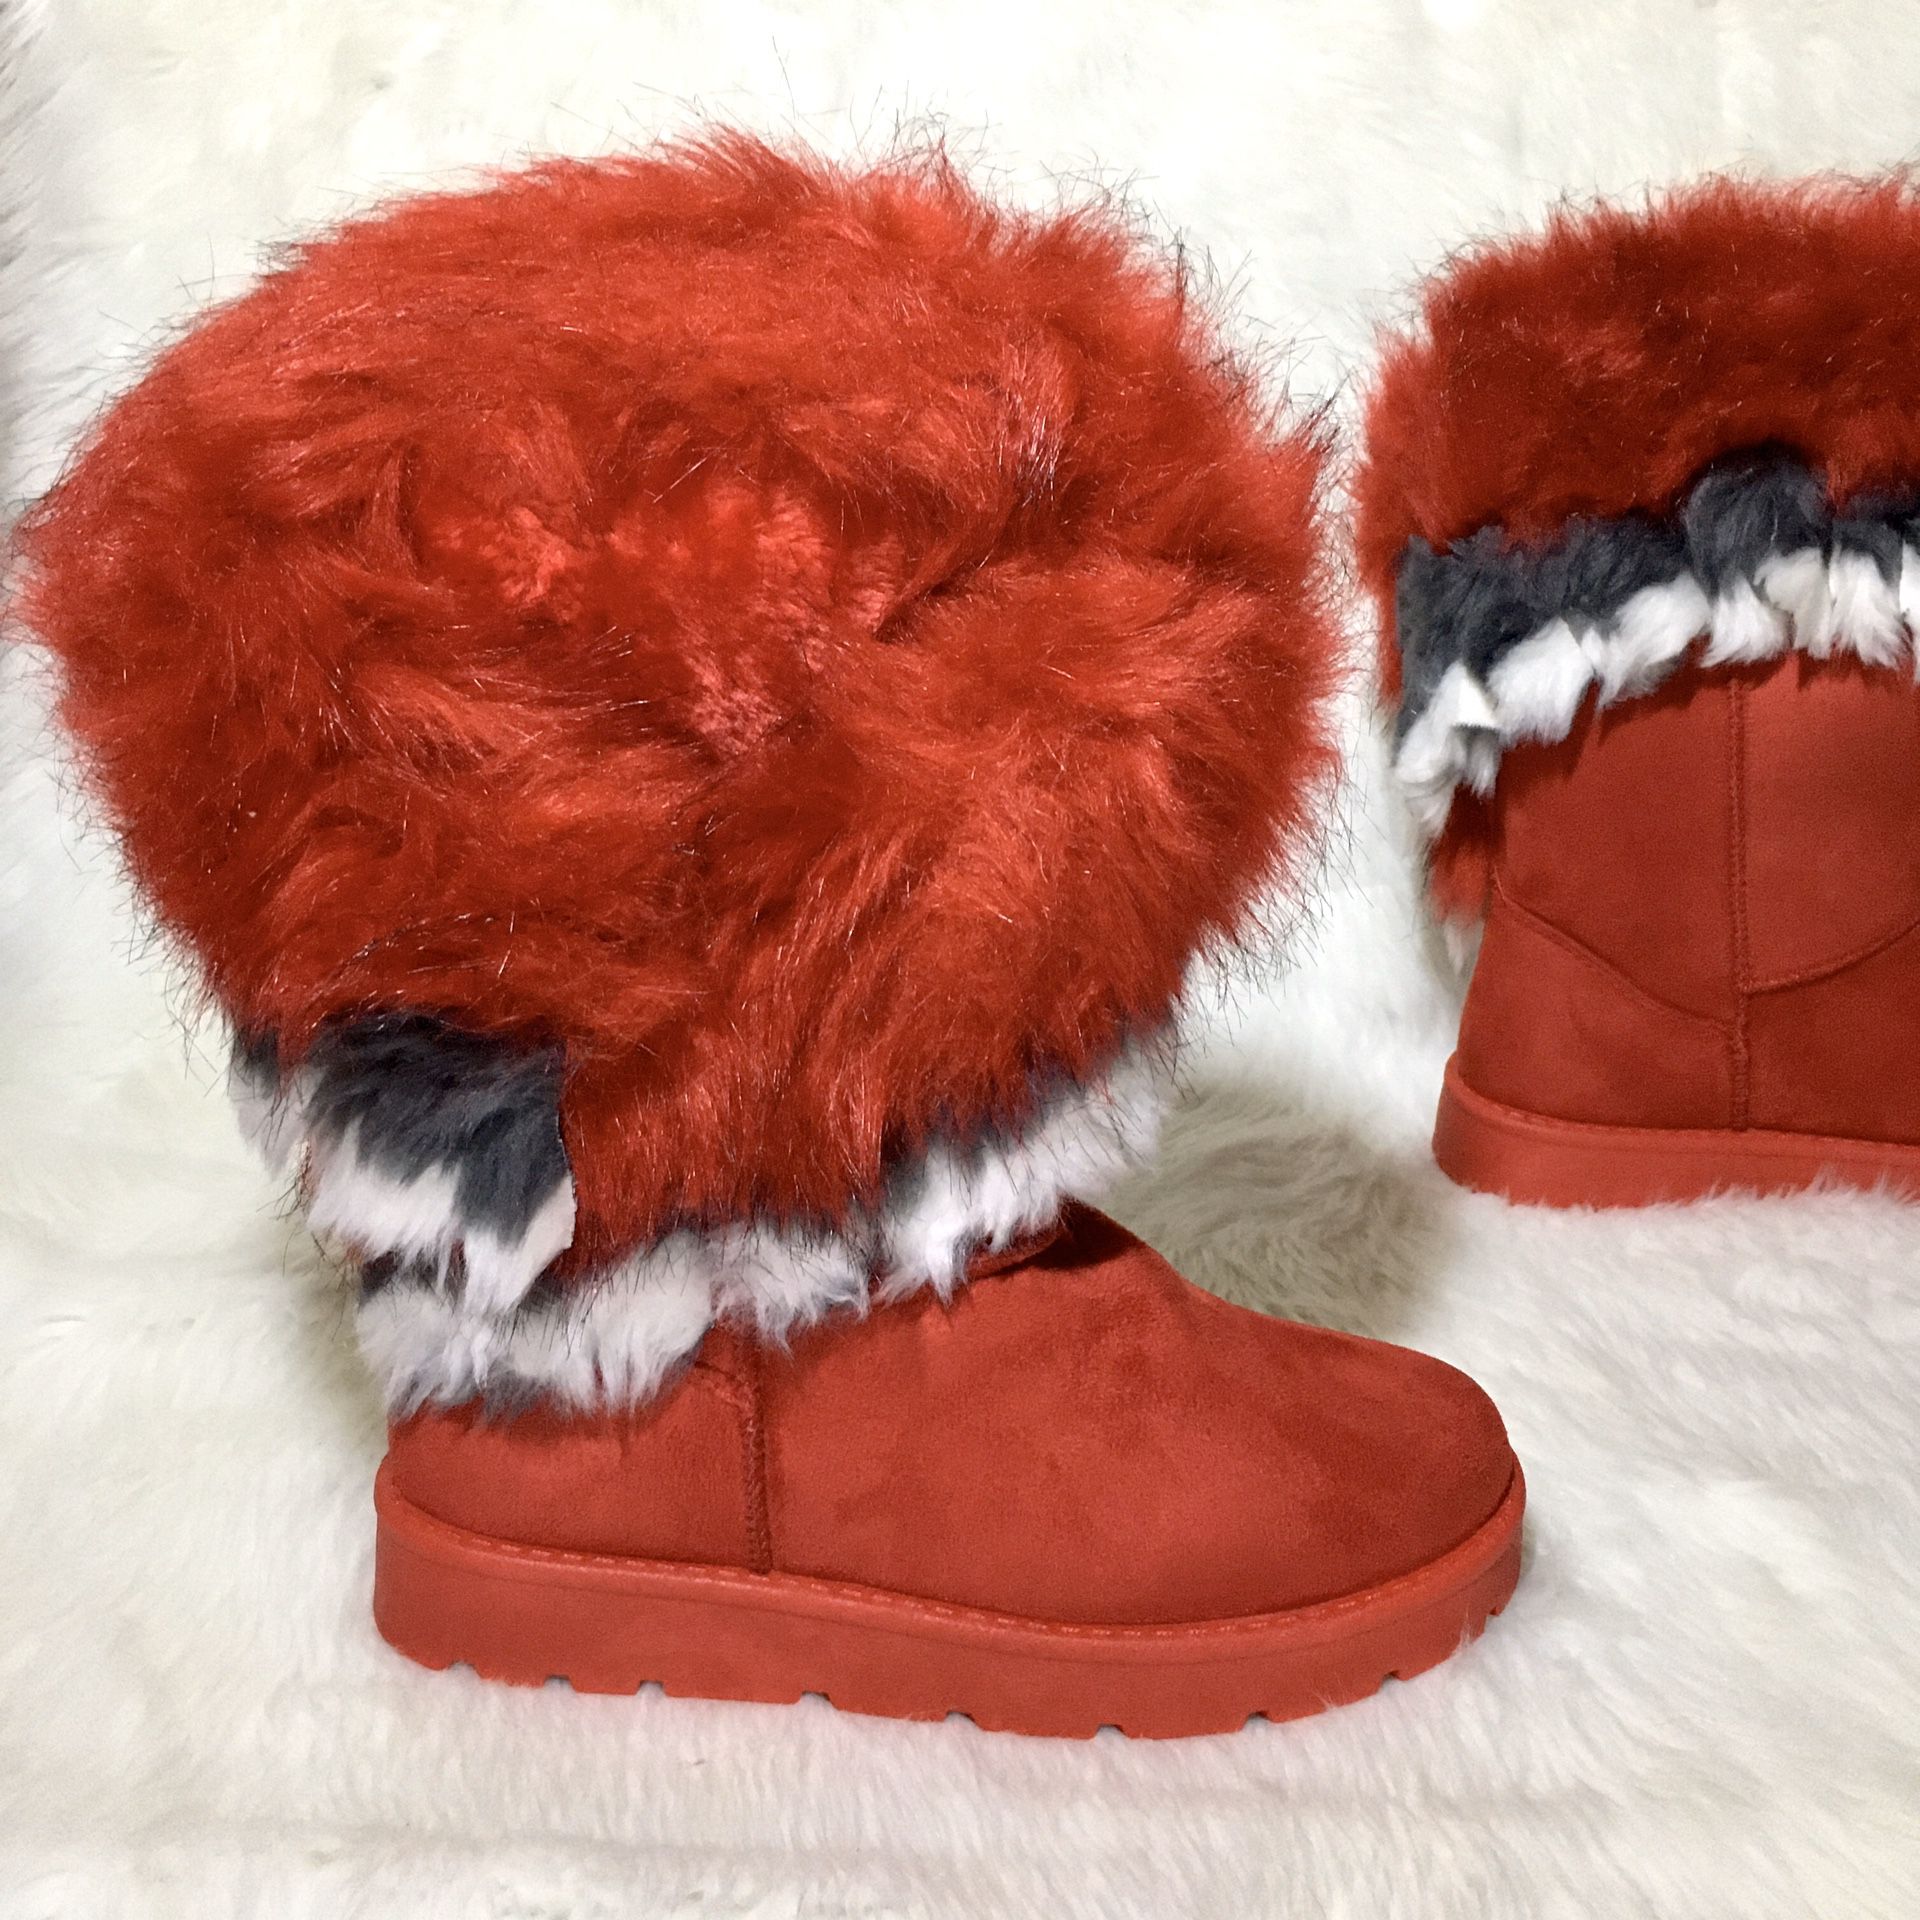 Women’s “Furry” Boots. Sizes 9.